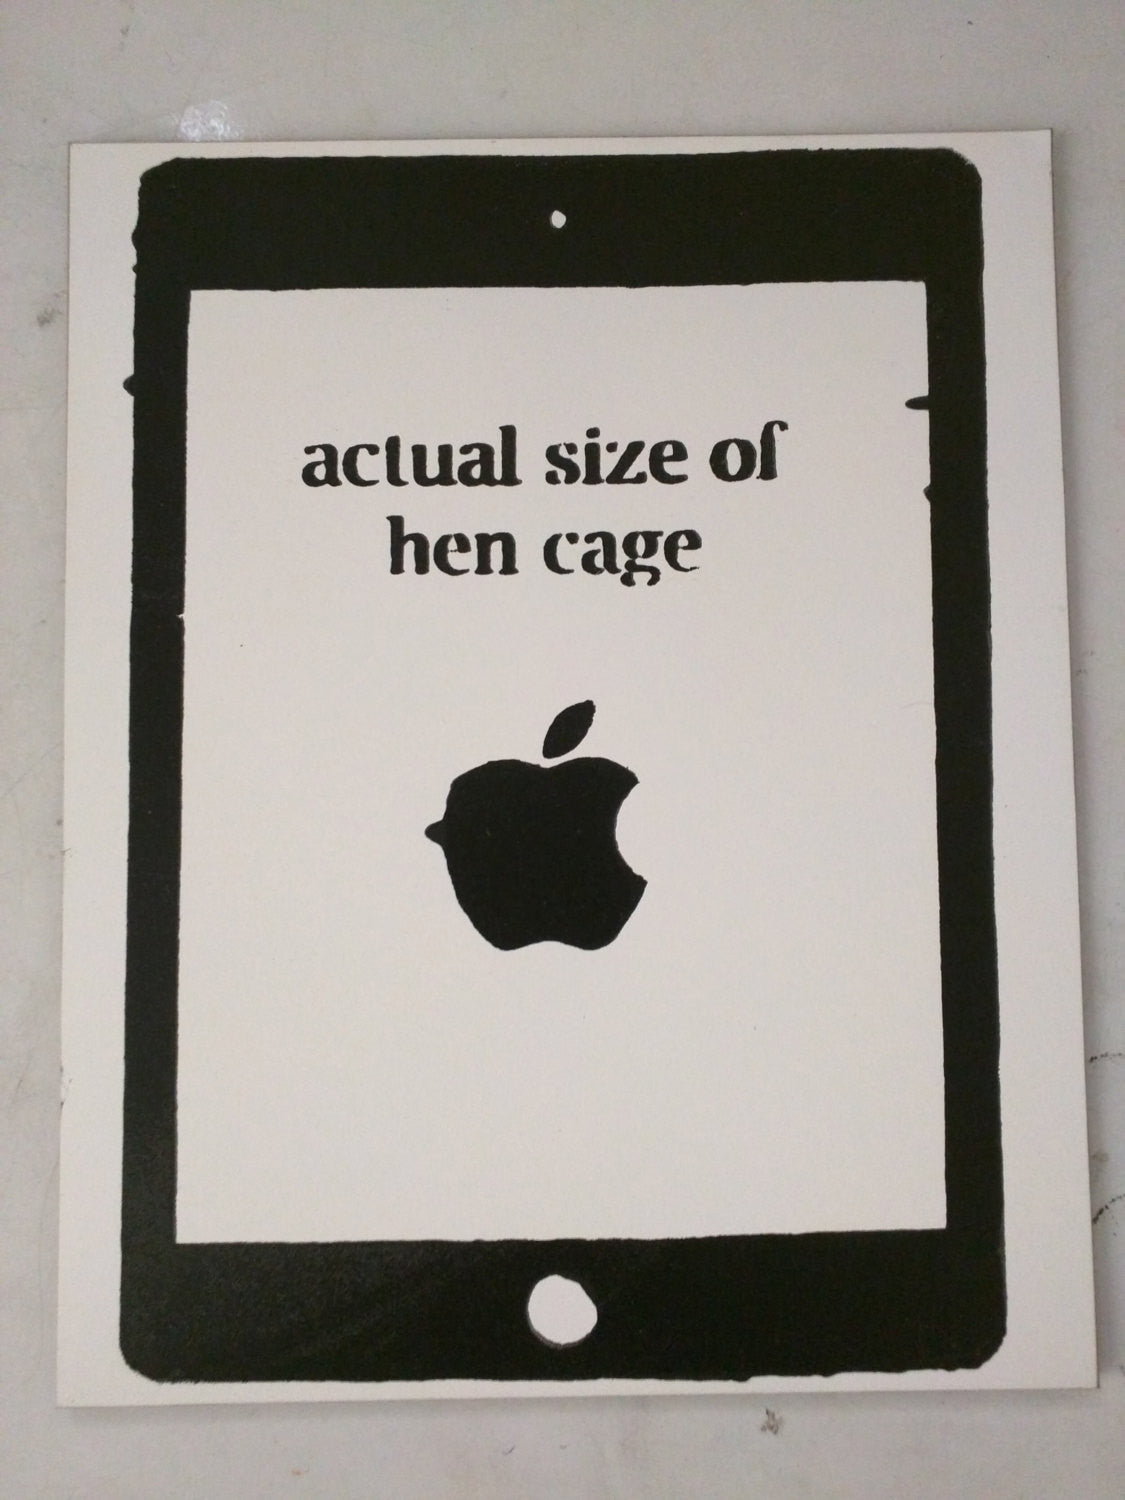 Limited Edition of 150 10x10 on Gessobord of Artwork "Actual Size of Hen Cage" featuring an Apple iPad Signed L3f0u